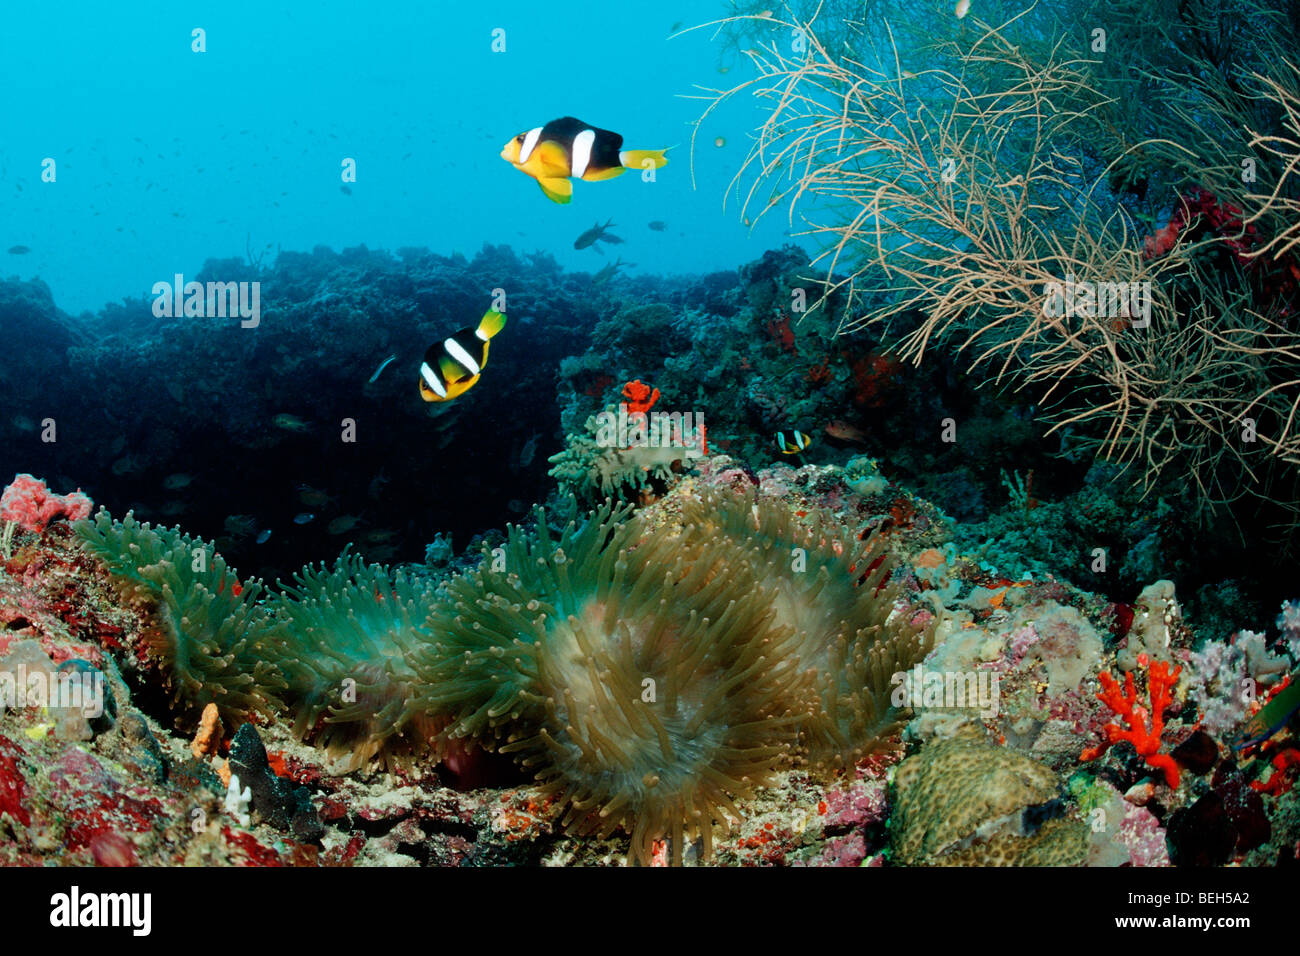 Clarks Anemonefish over Coral Reef, Amphiprion clarkii, North Ari Atoll, Maldives Stock Photo